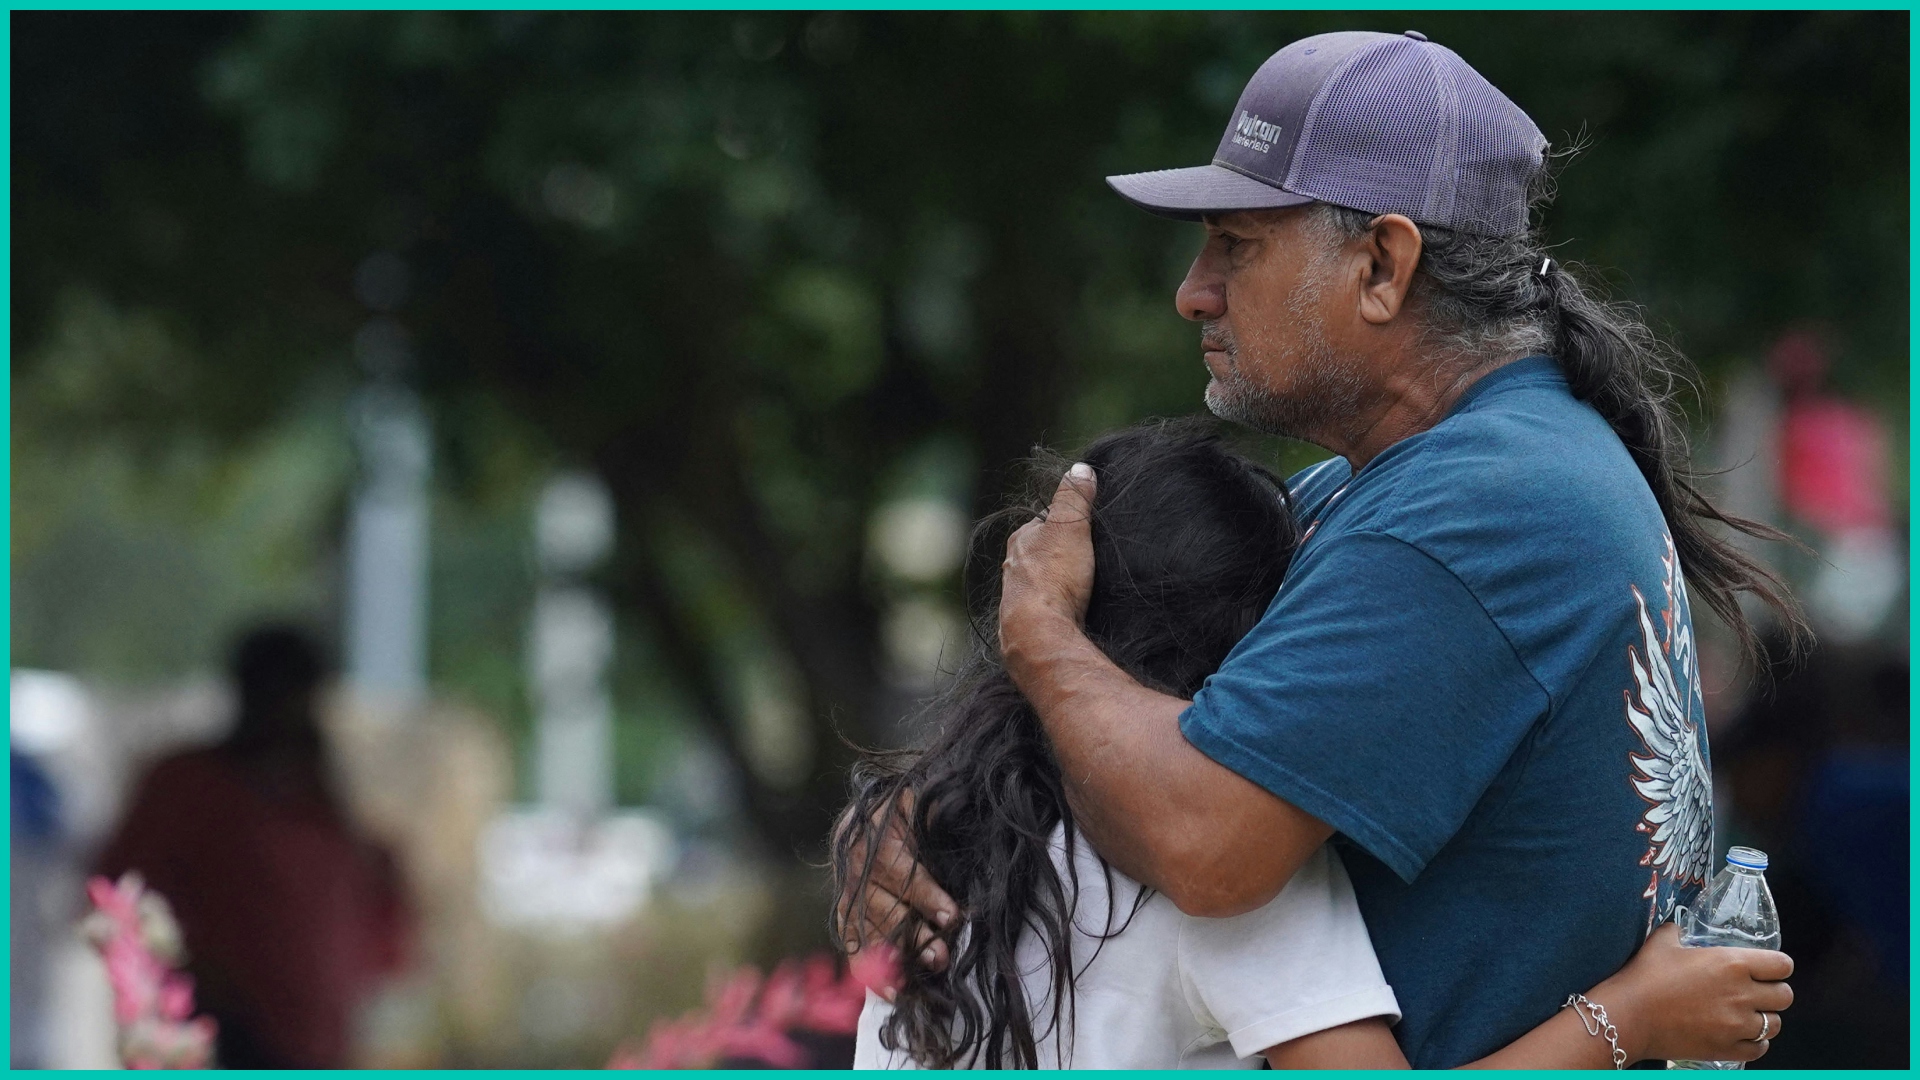 Families hug outside the Willie de Leon Civic Center where grief counseling will be offered in Uvalde, Texas, on May 24, 2022